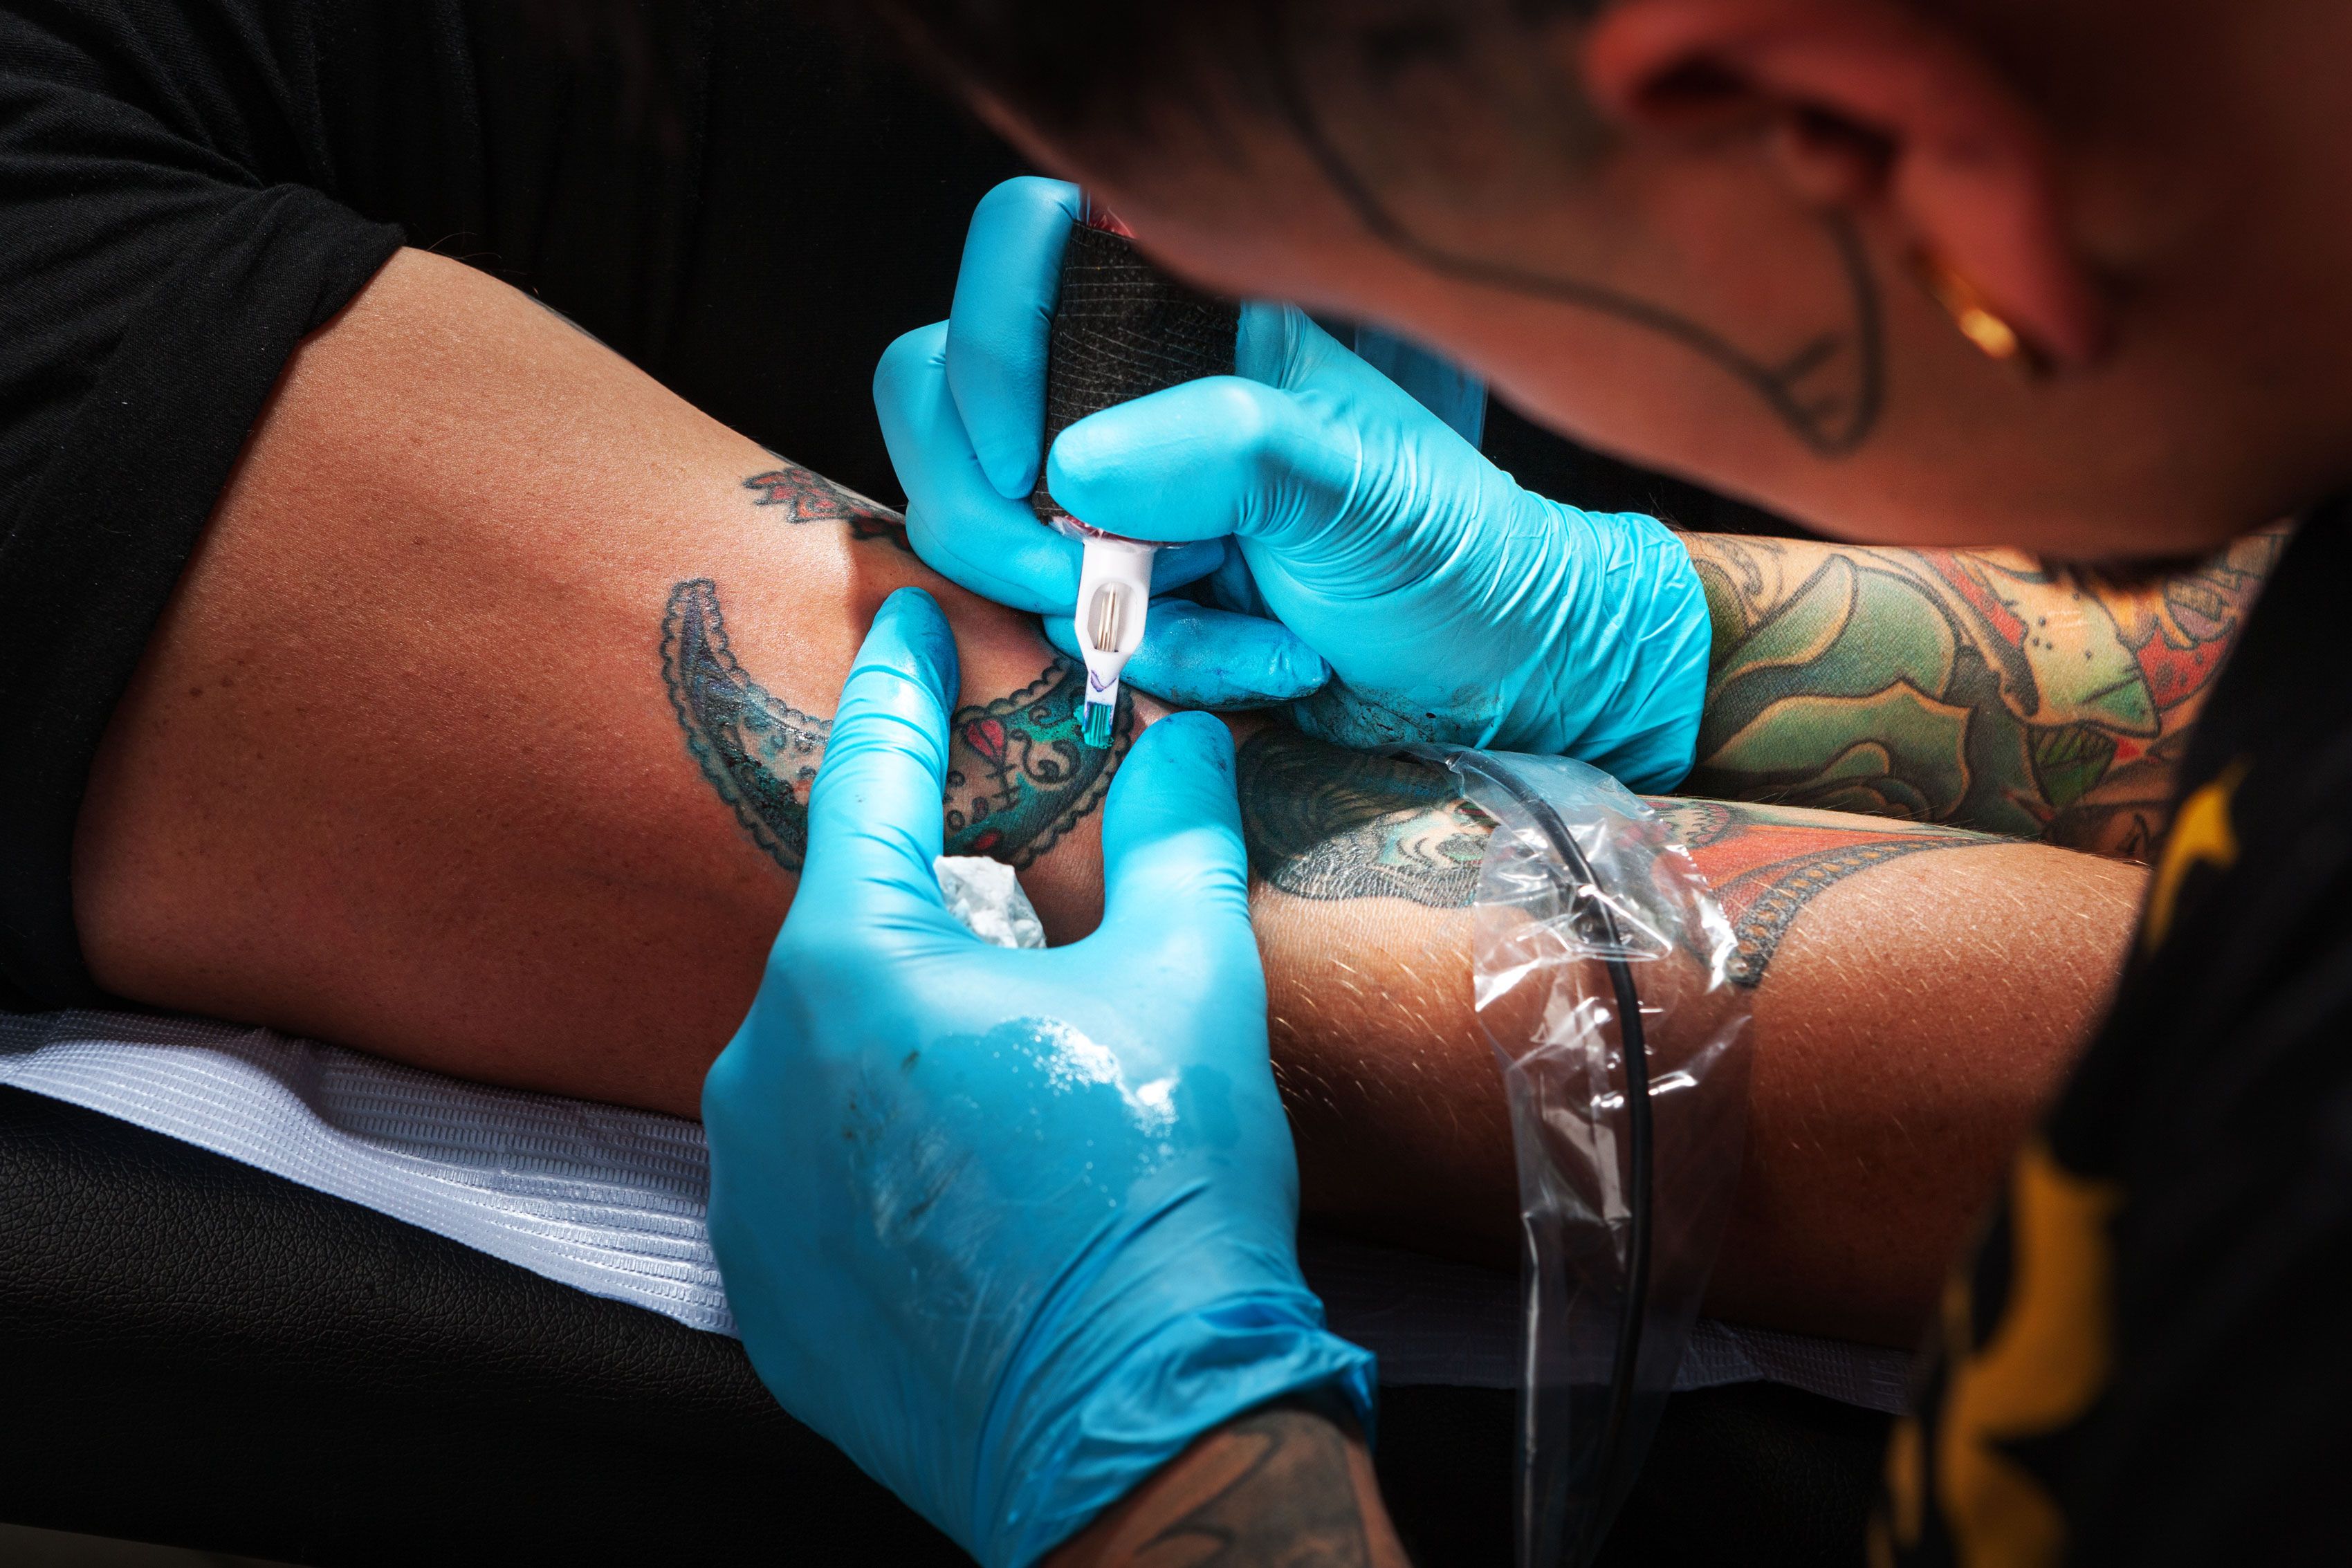 Medical tattoos offer important health information